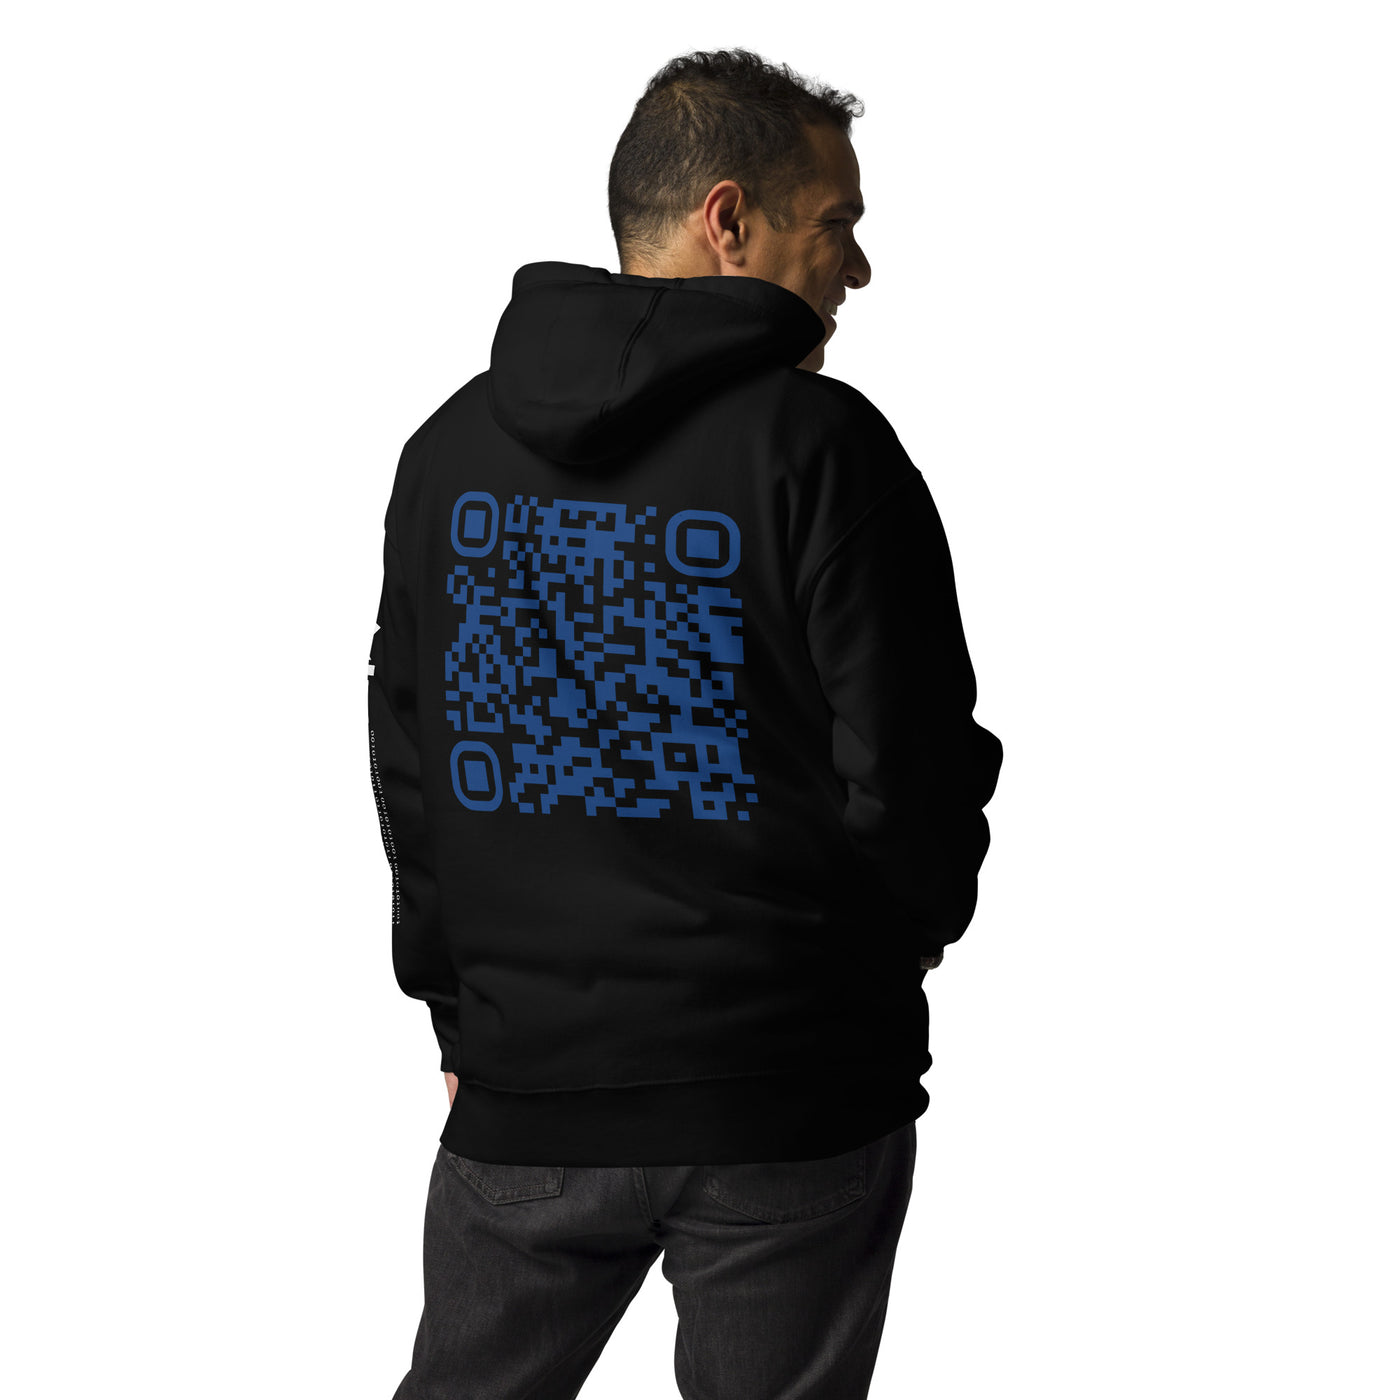 Who's the New Kid, Hacker, Developer, Gamer, Crypto King  - Unisex Hoodie Personalized QR Code